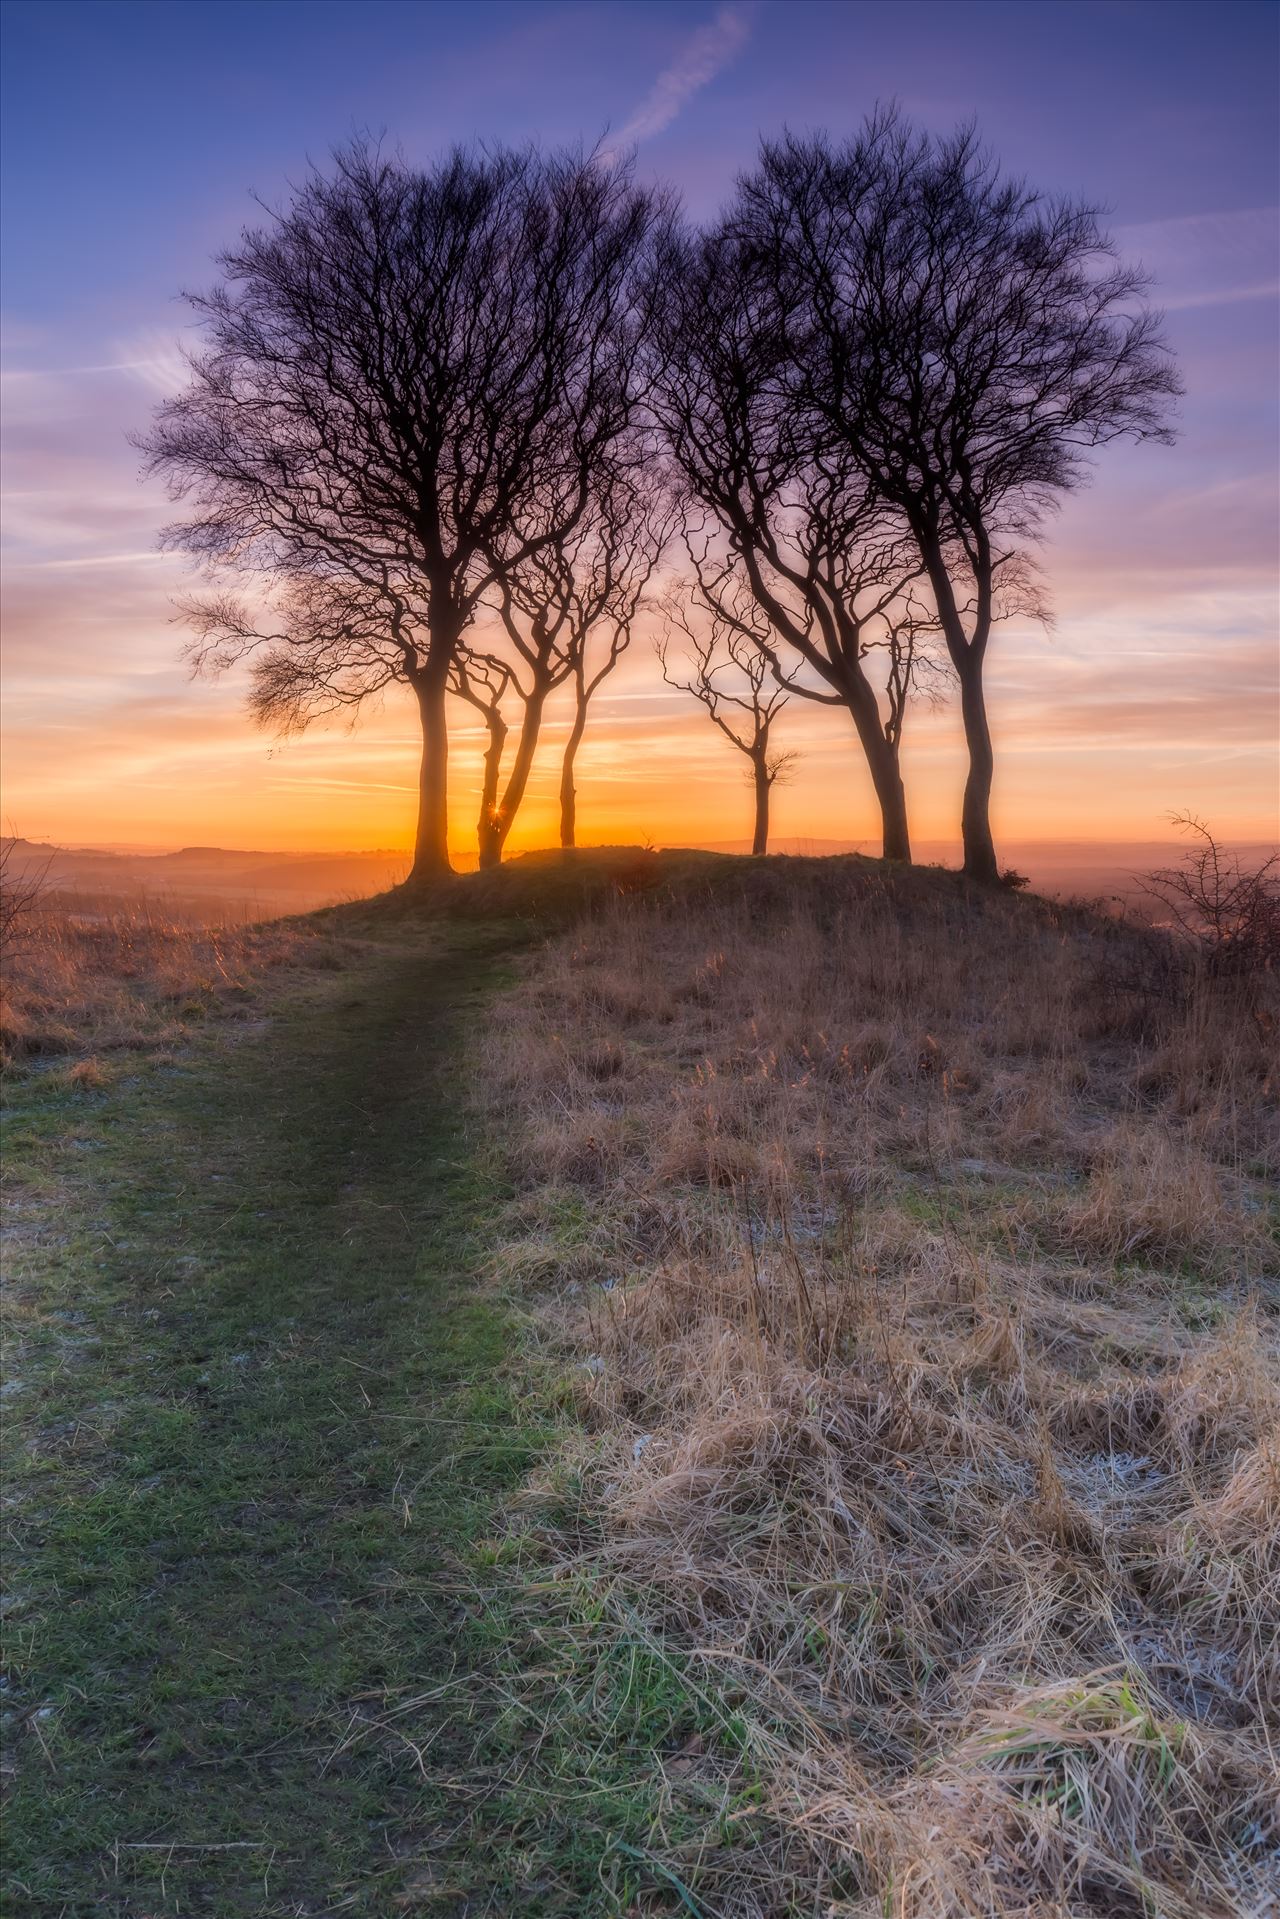 Sunset at Copt Hill - Orton edit - Copt Hill is an ancient burial ground near Houghton-le-Spring. The site is marked by six trees. Presumably there used to be a seventh tree, as they are known as the Seven Sisters. by philreay